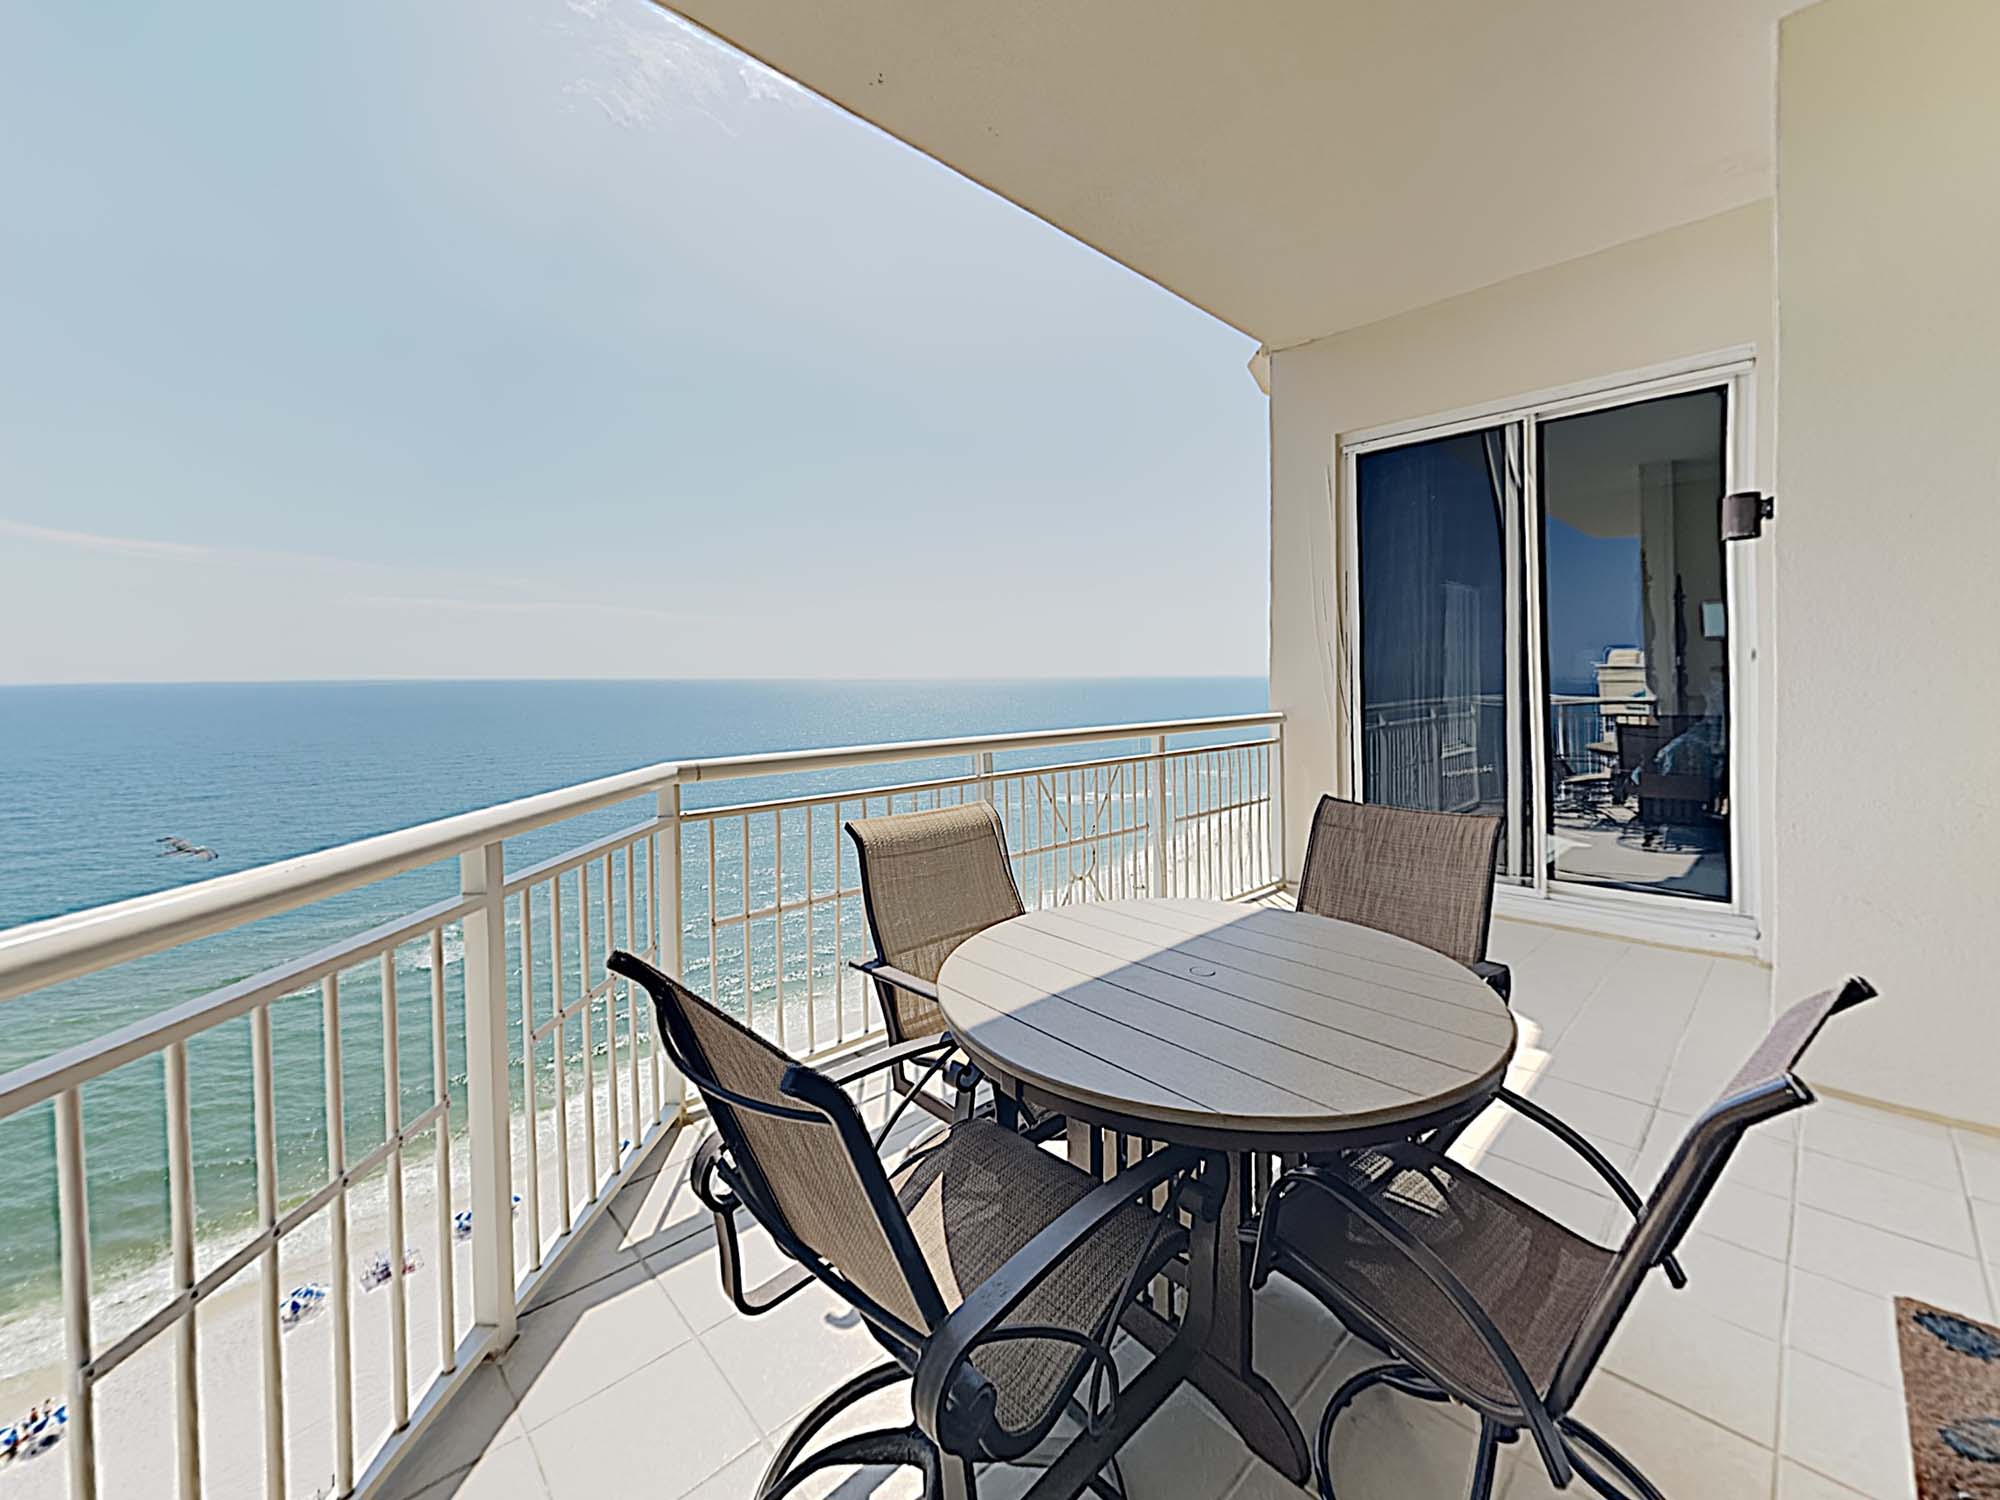 Vacation Rentals for the 4th of July in Perdido Key